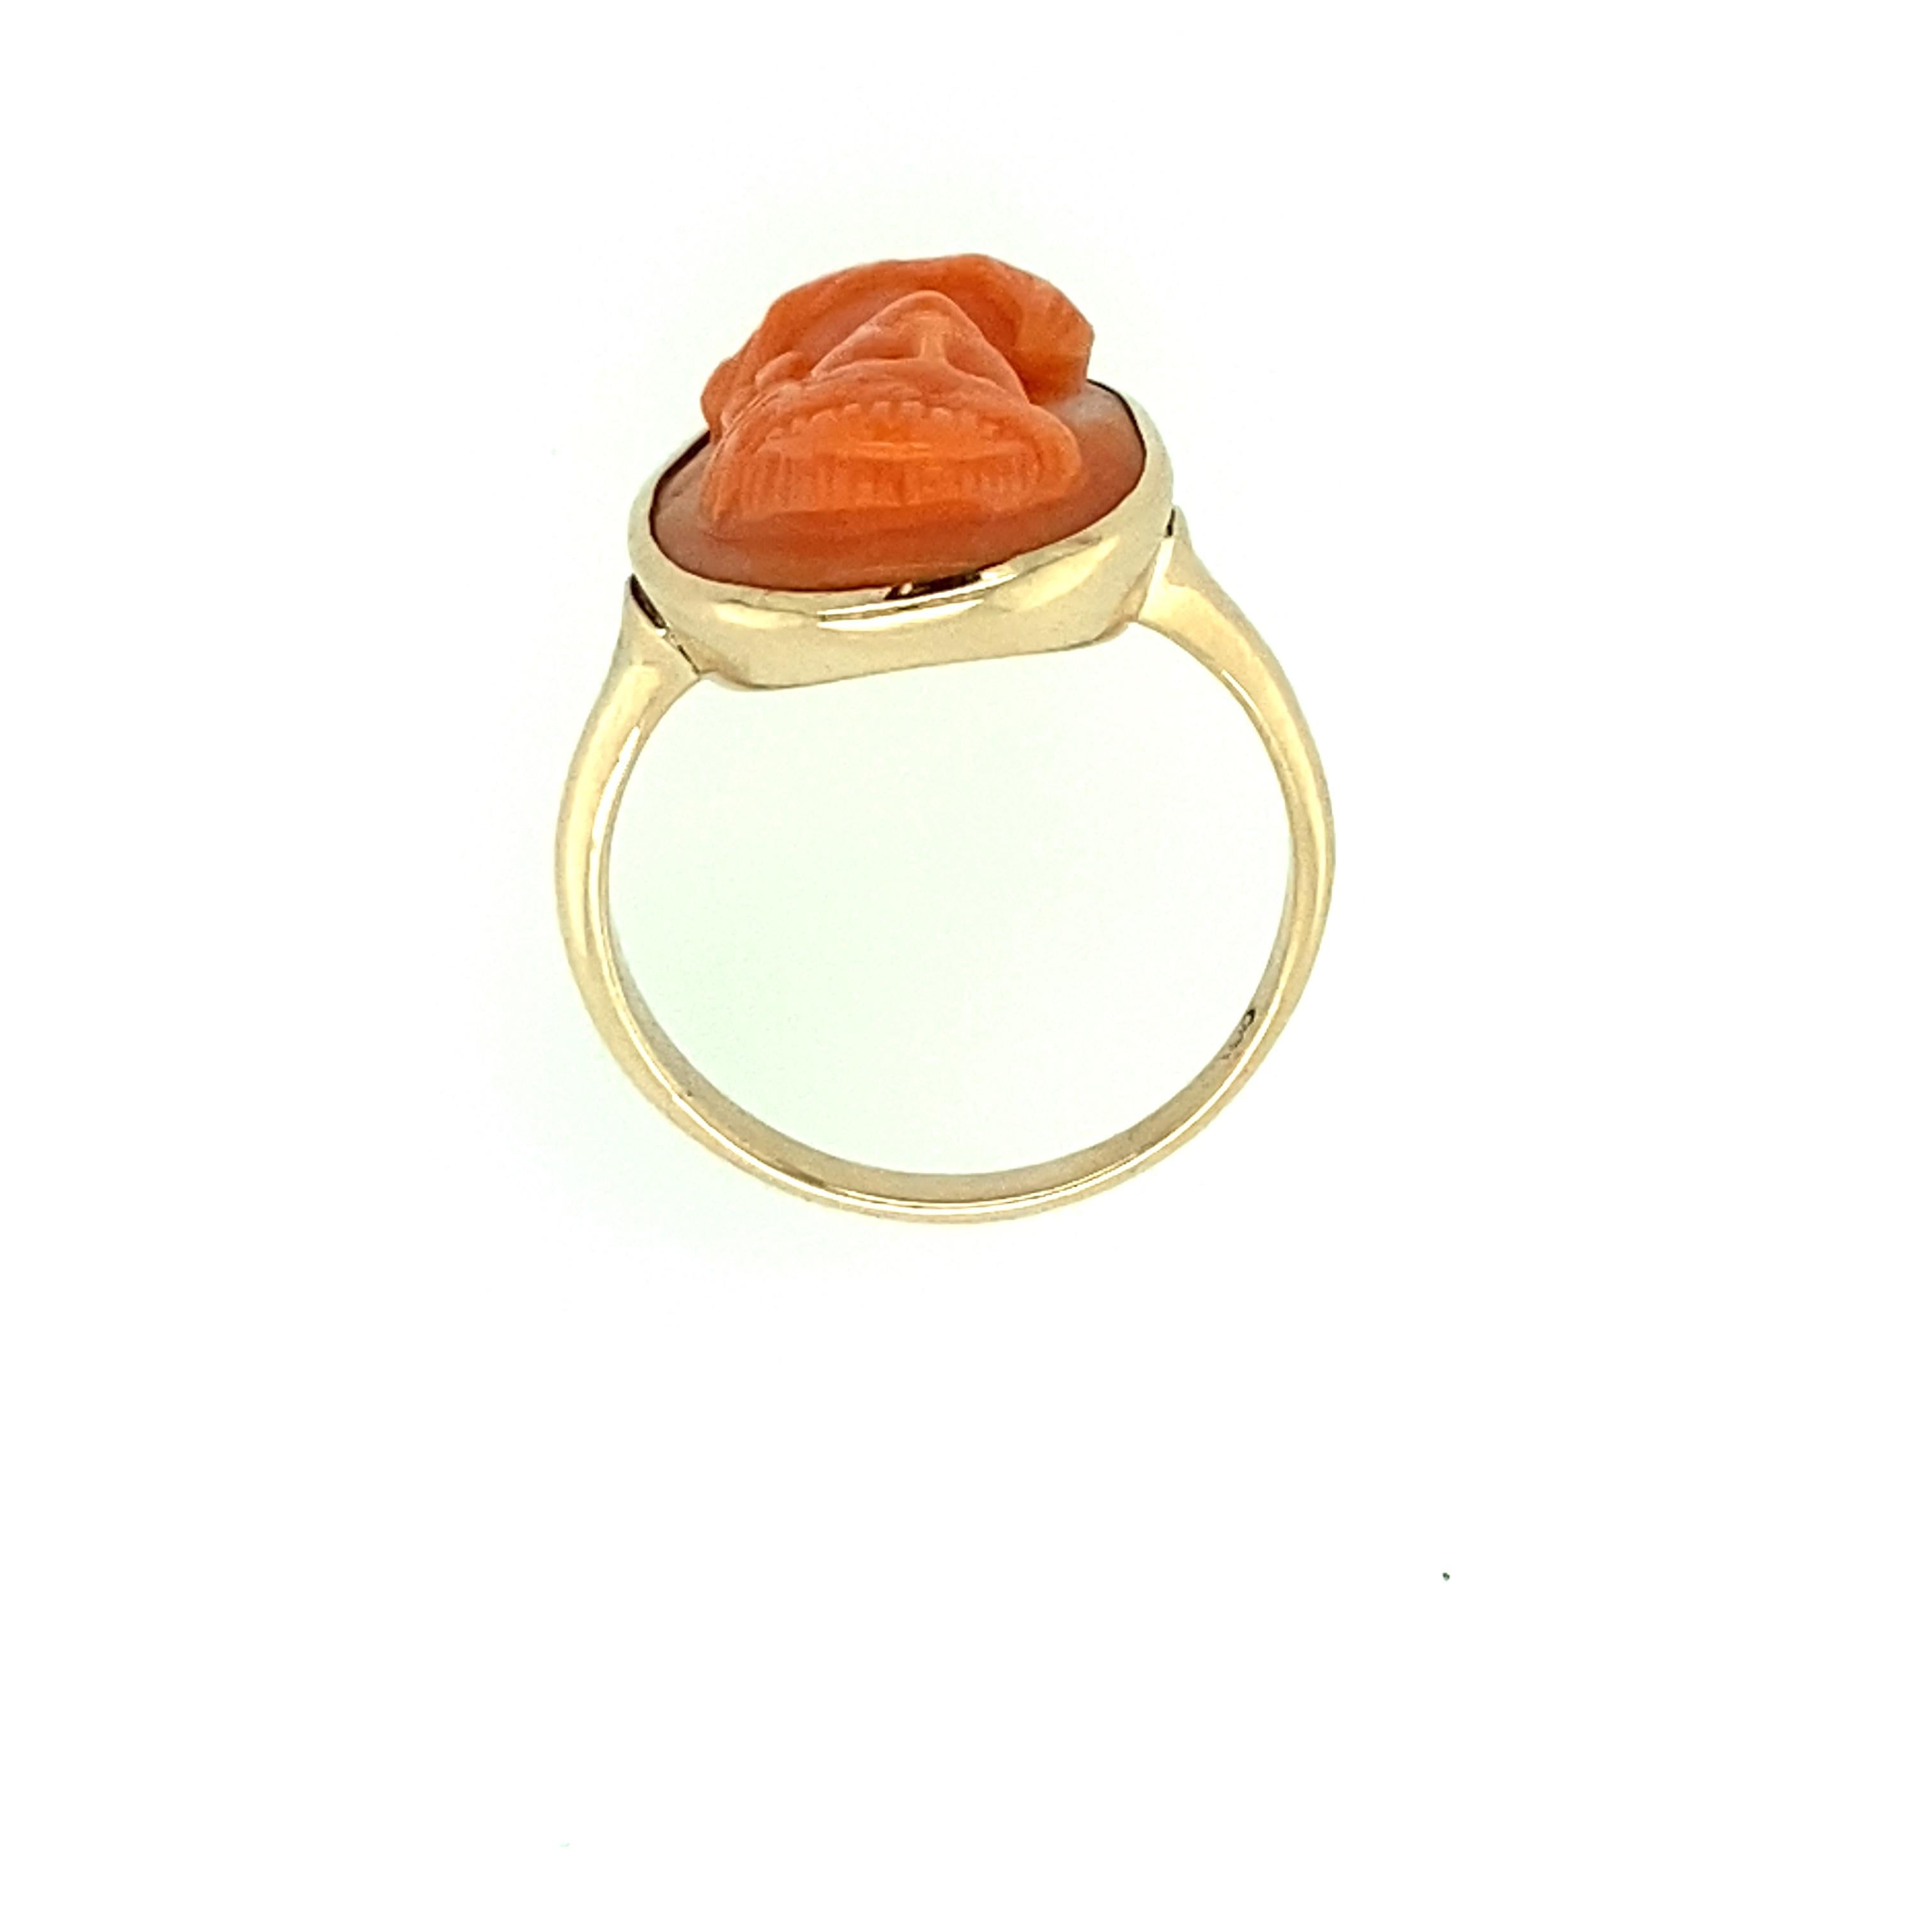 One 10 karat yellow gold (stamped with triple ring hallmark) orange cameo ring measuring 17.27x13.23mm.  The shank measures 3.06mm near the top of the ring and tapers to 2.11mm at the base.  Finger size 6.25. Circa 1920s 